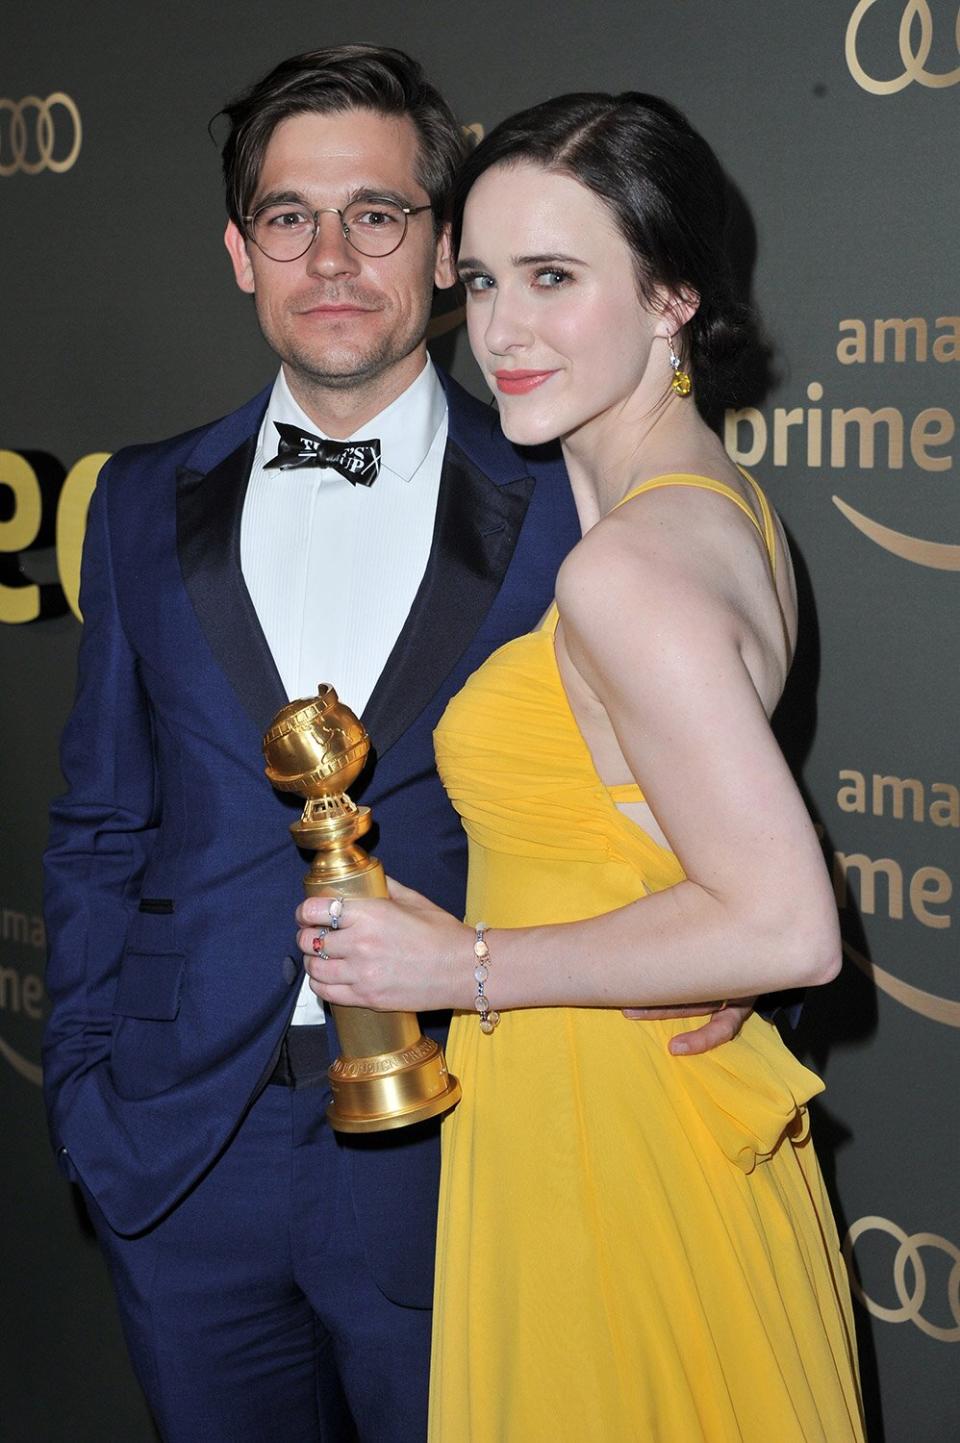 BEVERLY HILLS, CALIFORNIA - JANUARY 06: Jason Ralph (L) and Rachel Brosnahan attend Amazon Prime Video's Golden Glove Awards after party at The Beverly Hilton Hotel on January 06, 2019 in Beverly Hills, California. (Photo by Allen Berezovsky/WireImage,)